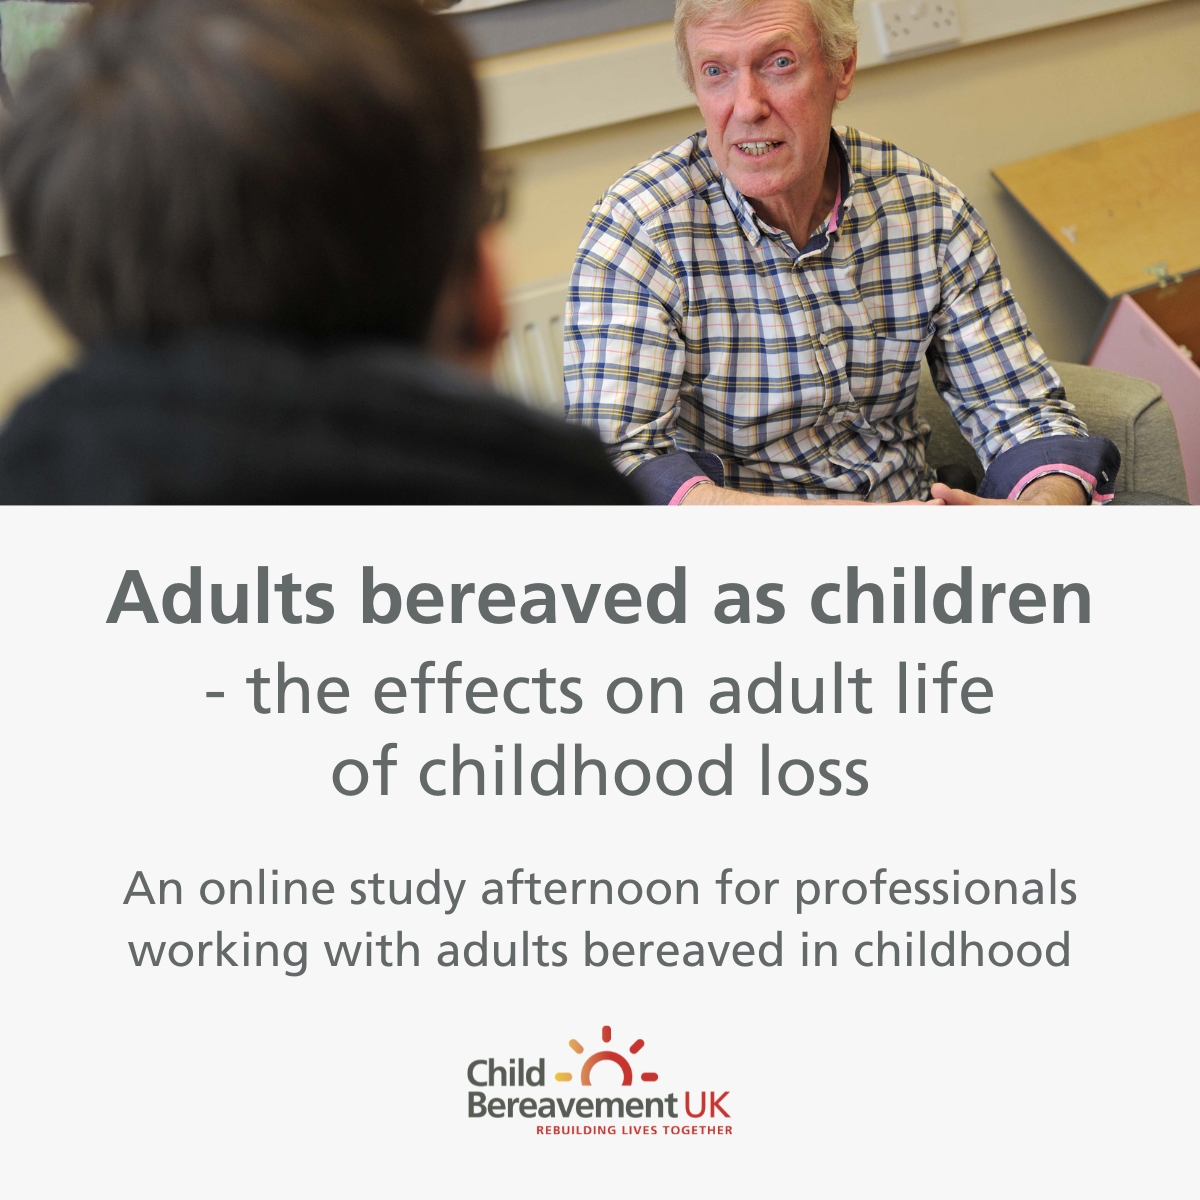 Our online study half-day ‘Adults bereaved as children – the effects on adult life of childhood loss’ (14 May, 2pm to 5pm, online) looks at the way the death of someone close in childhood can resonate through life. Chaired by Julie Stokes OBE, Executive Coach and Founder of…